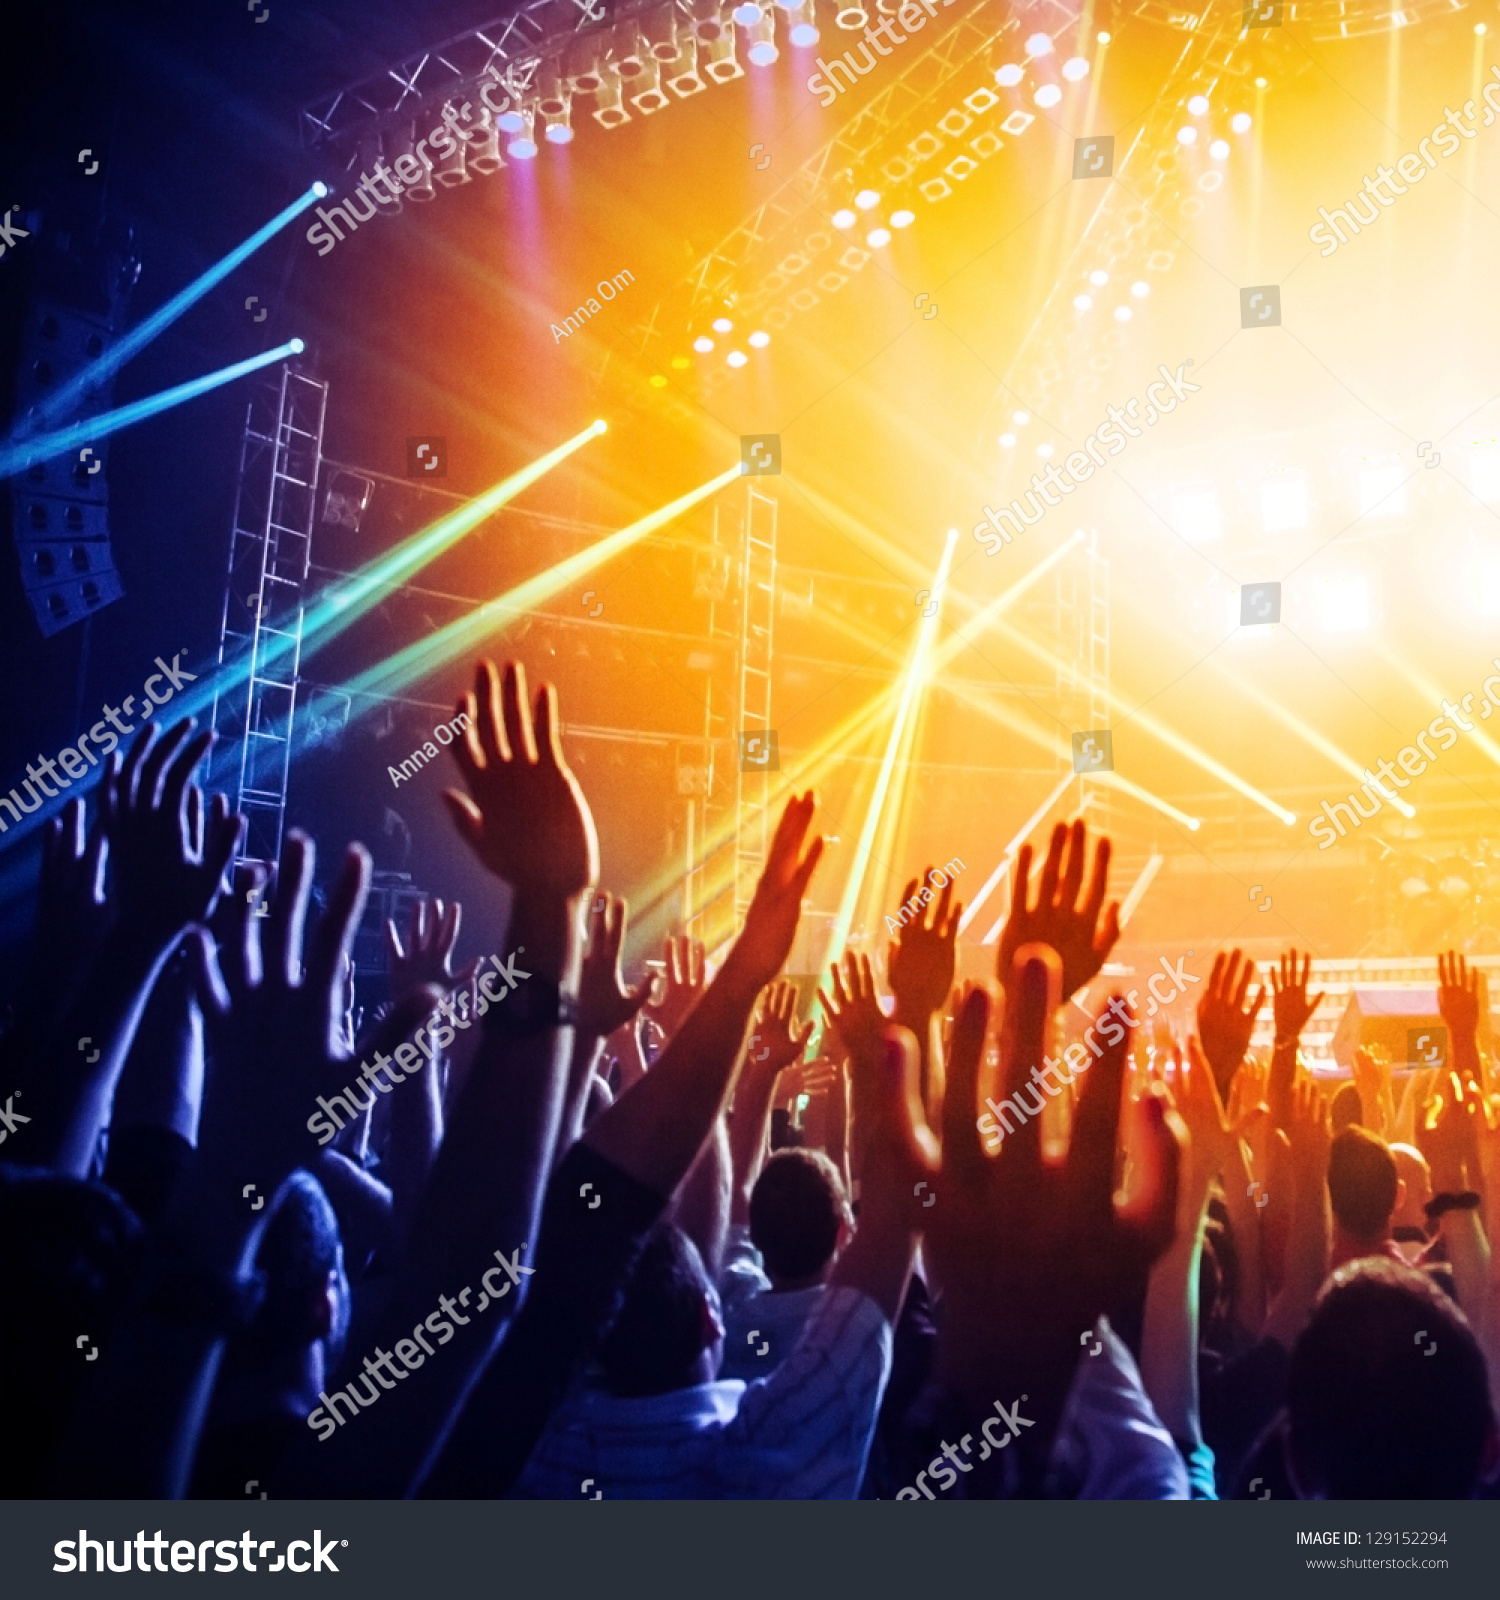 Photo of many people enjoying rock concert, crowd with raised up hands dancing in nightclub, audience applauding to musician band, night entertainment, music festival, happy youth, luxury party #129152294